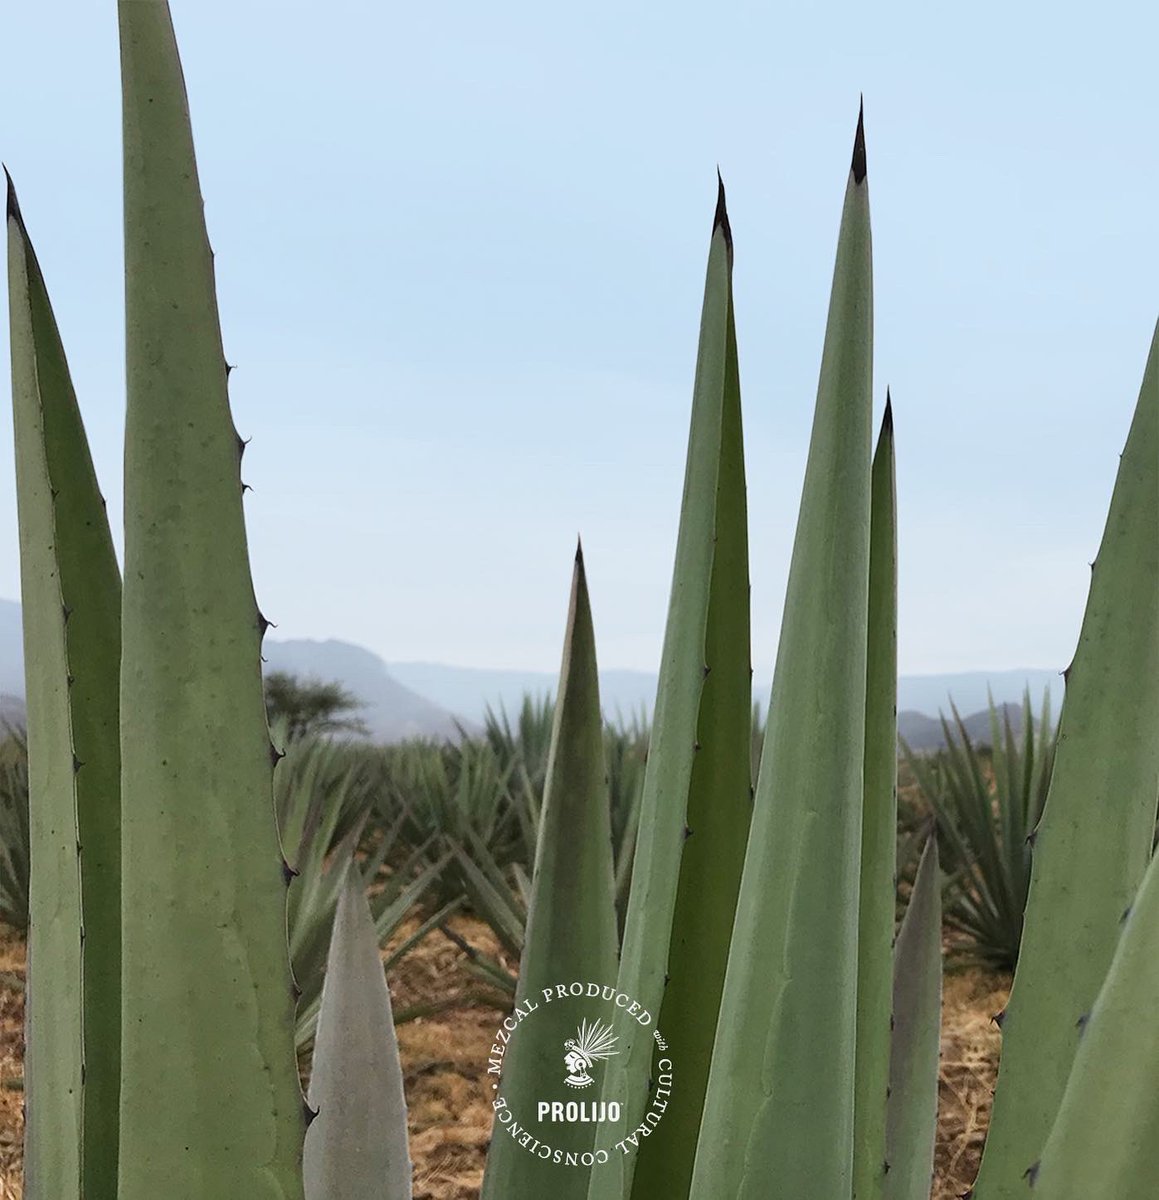 Let the sunlight guide the health and growth of the espadín agave.
#TheSpiritLives #ProlijoMezcal